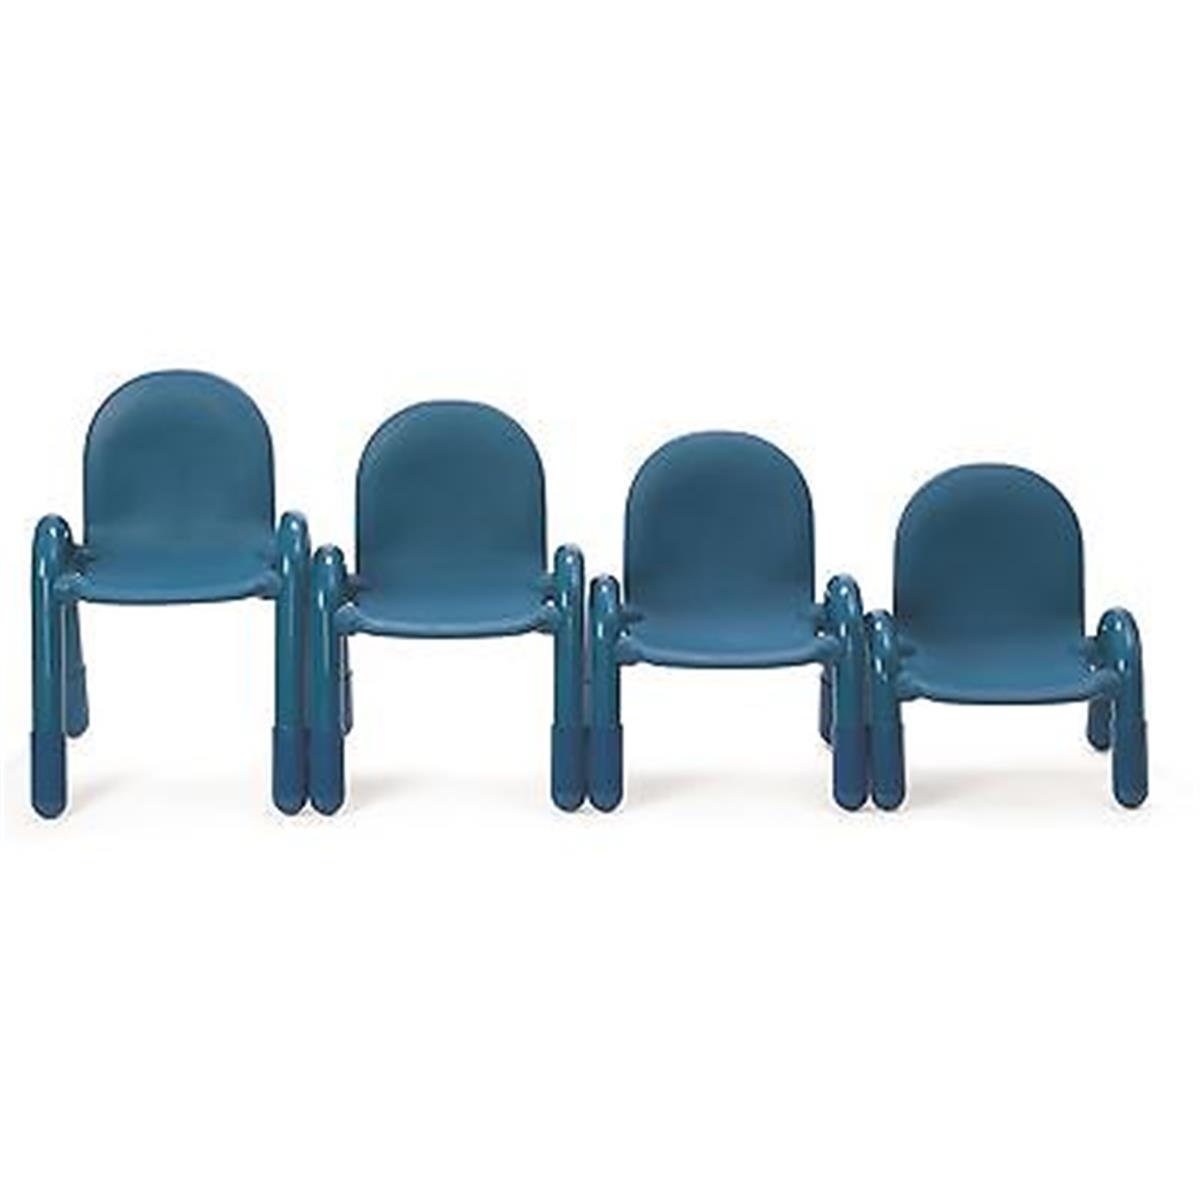 Angeles Ab7907gn 7 In. Baseline Plastic Classroom Chair, Teal Green